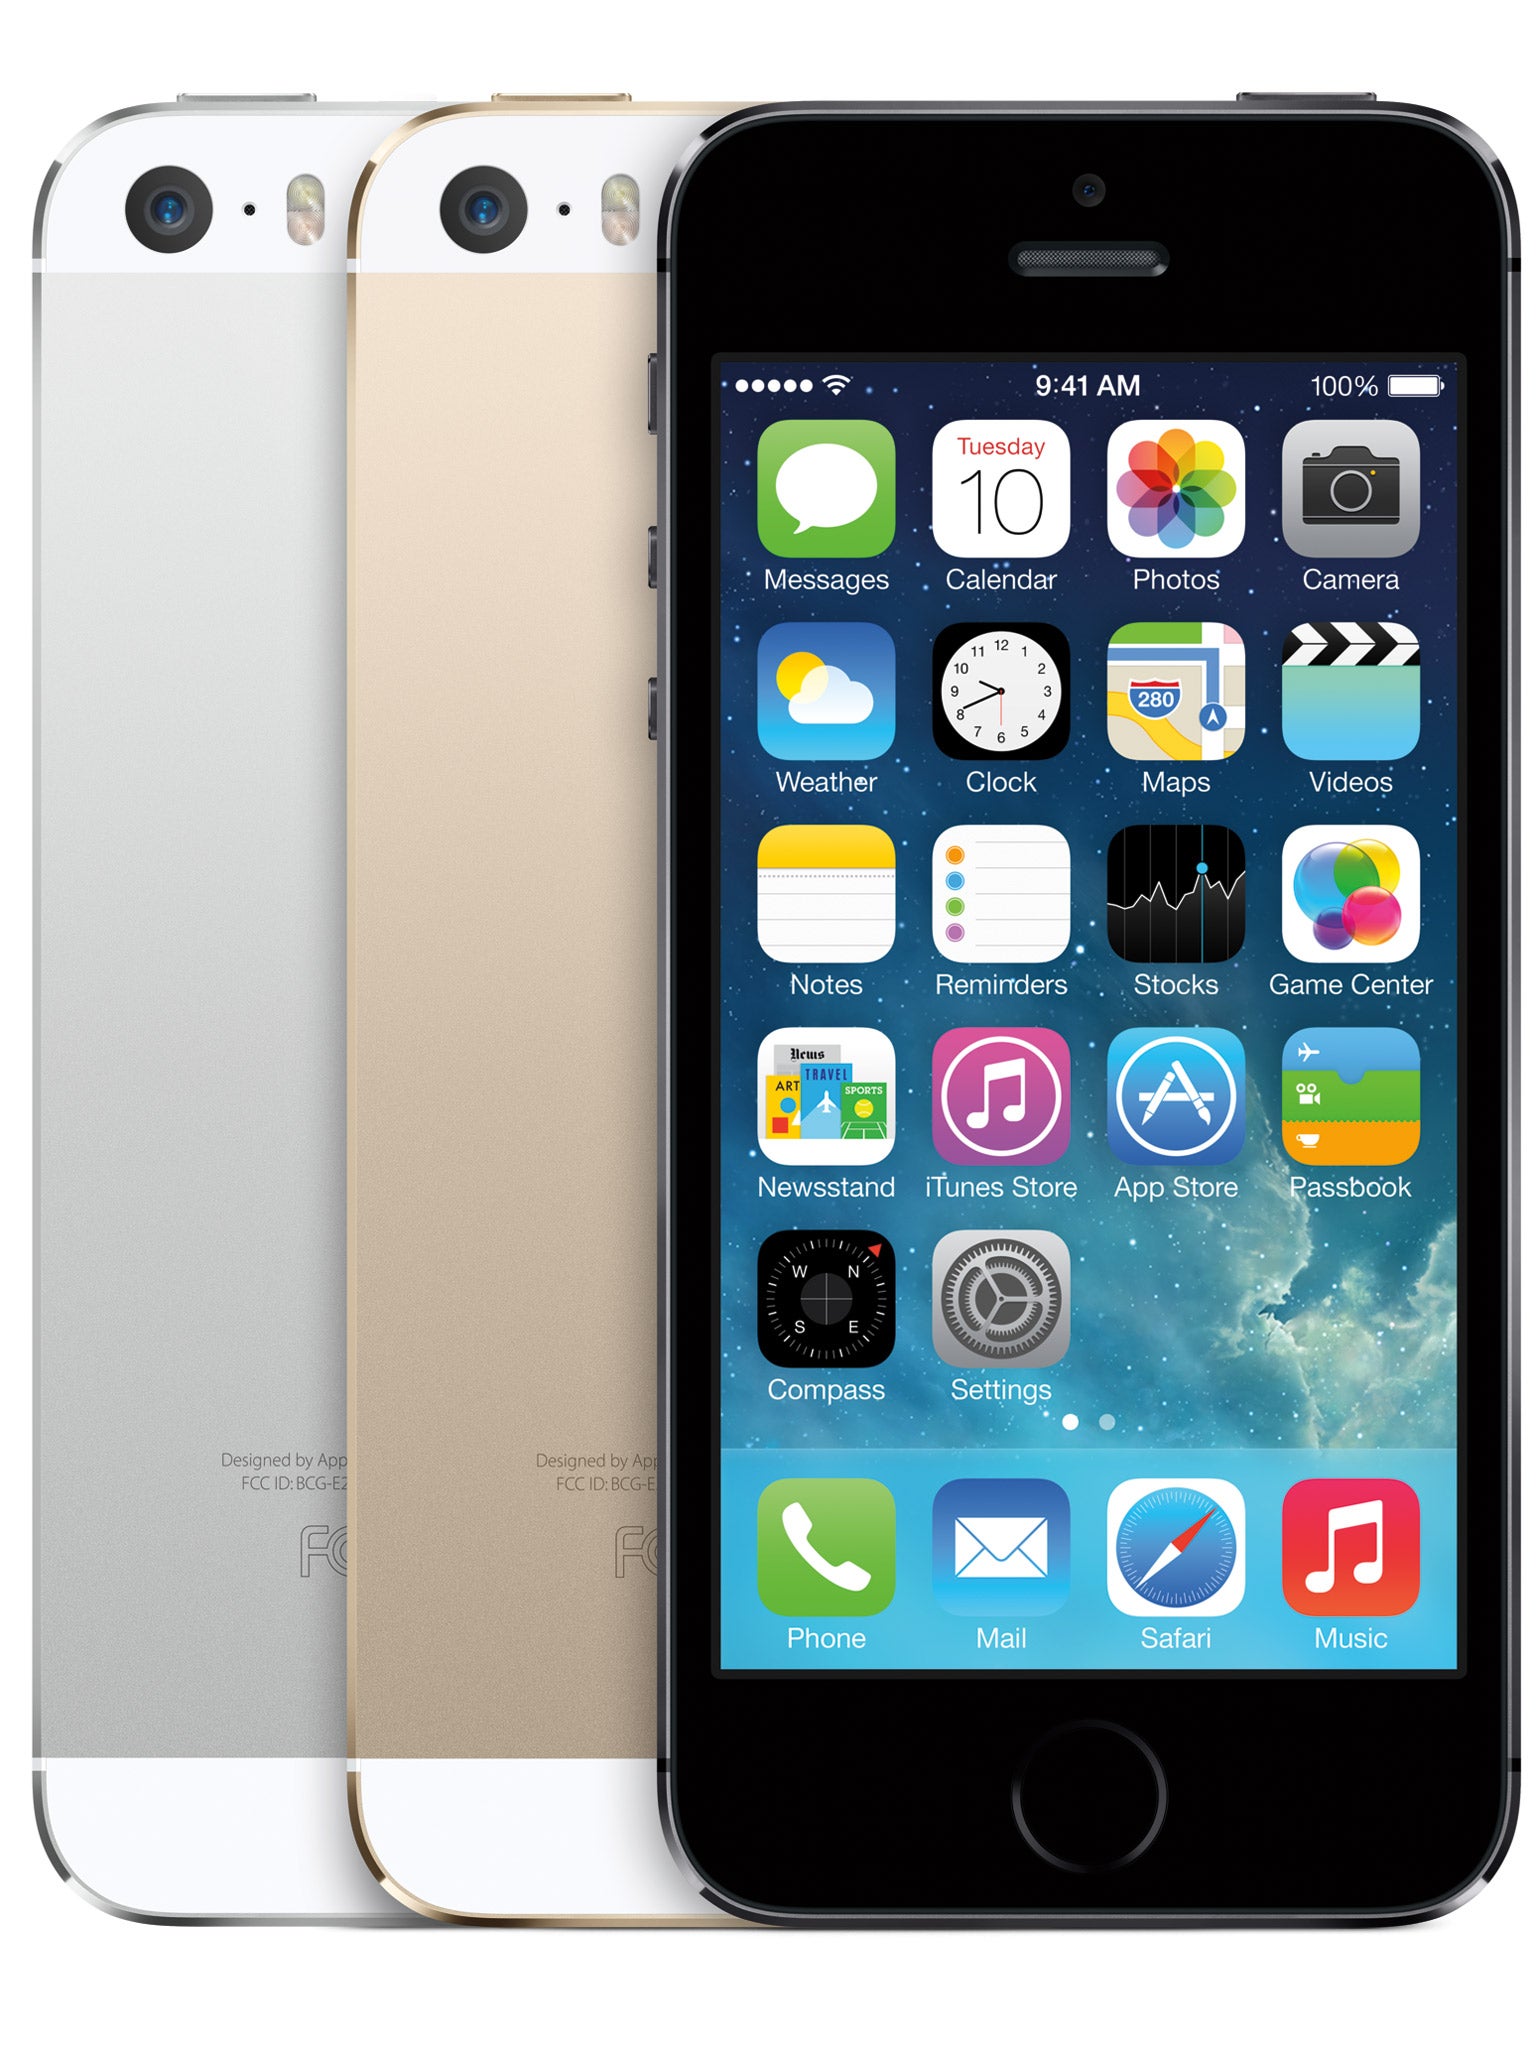 The differences lie within: the Apple iPhone 5s